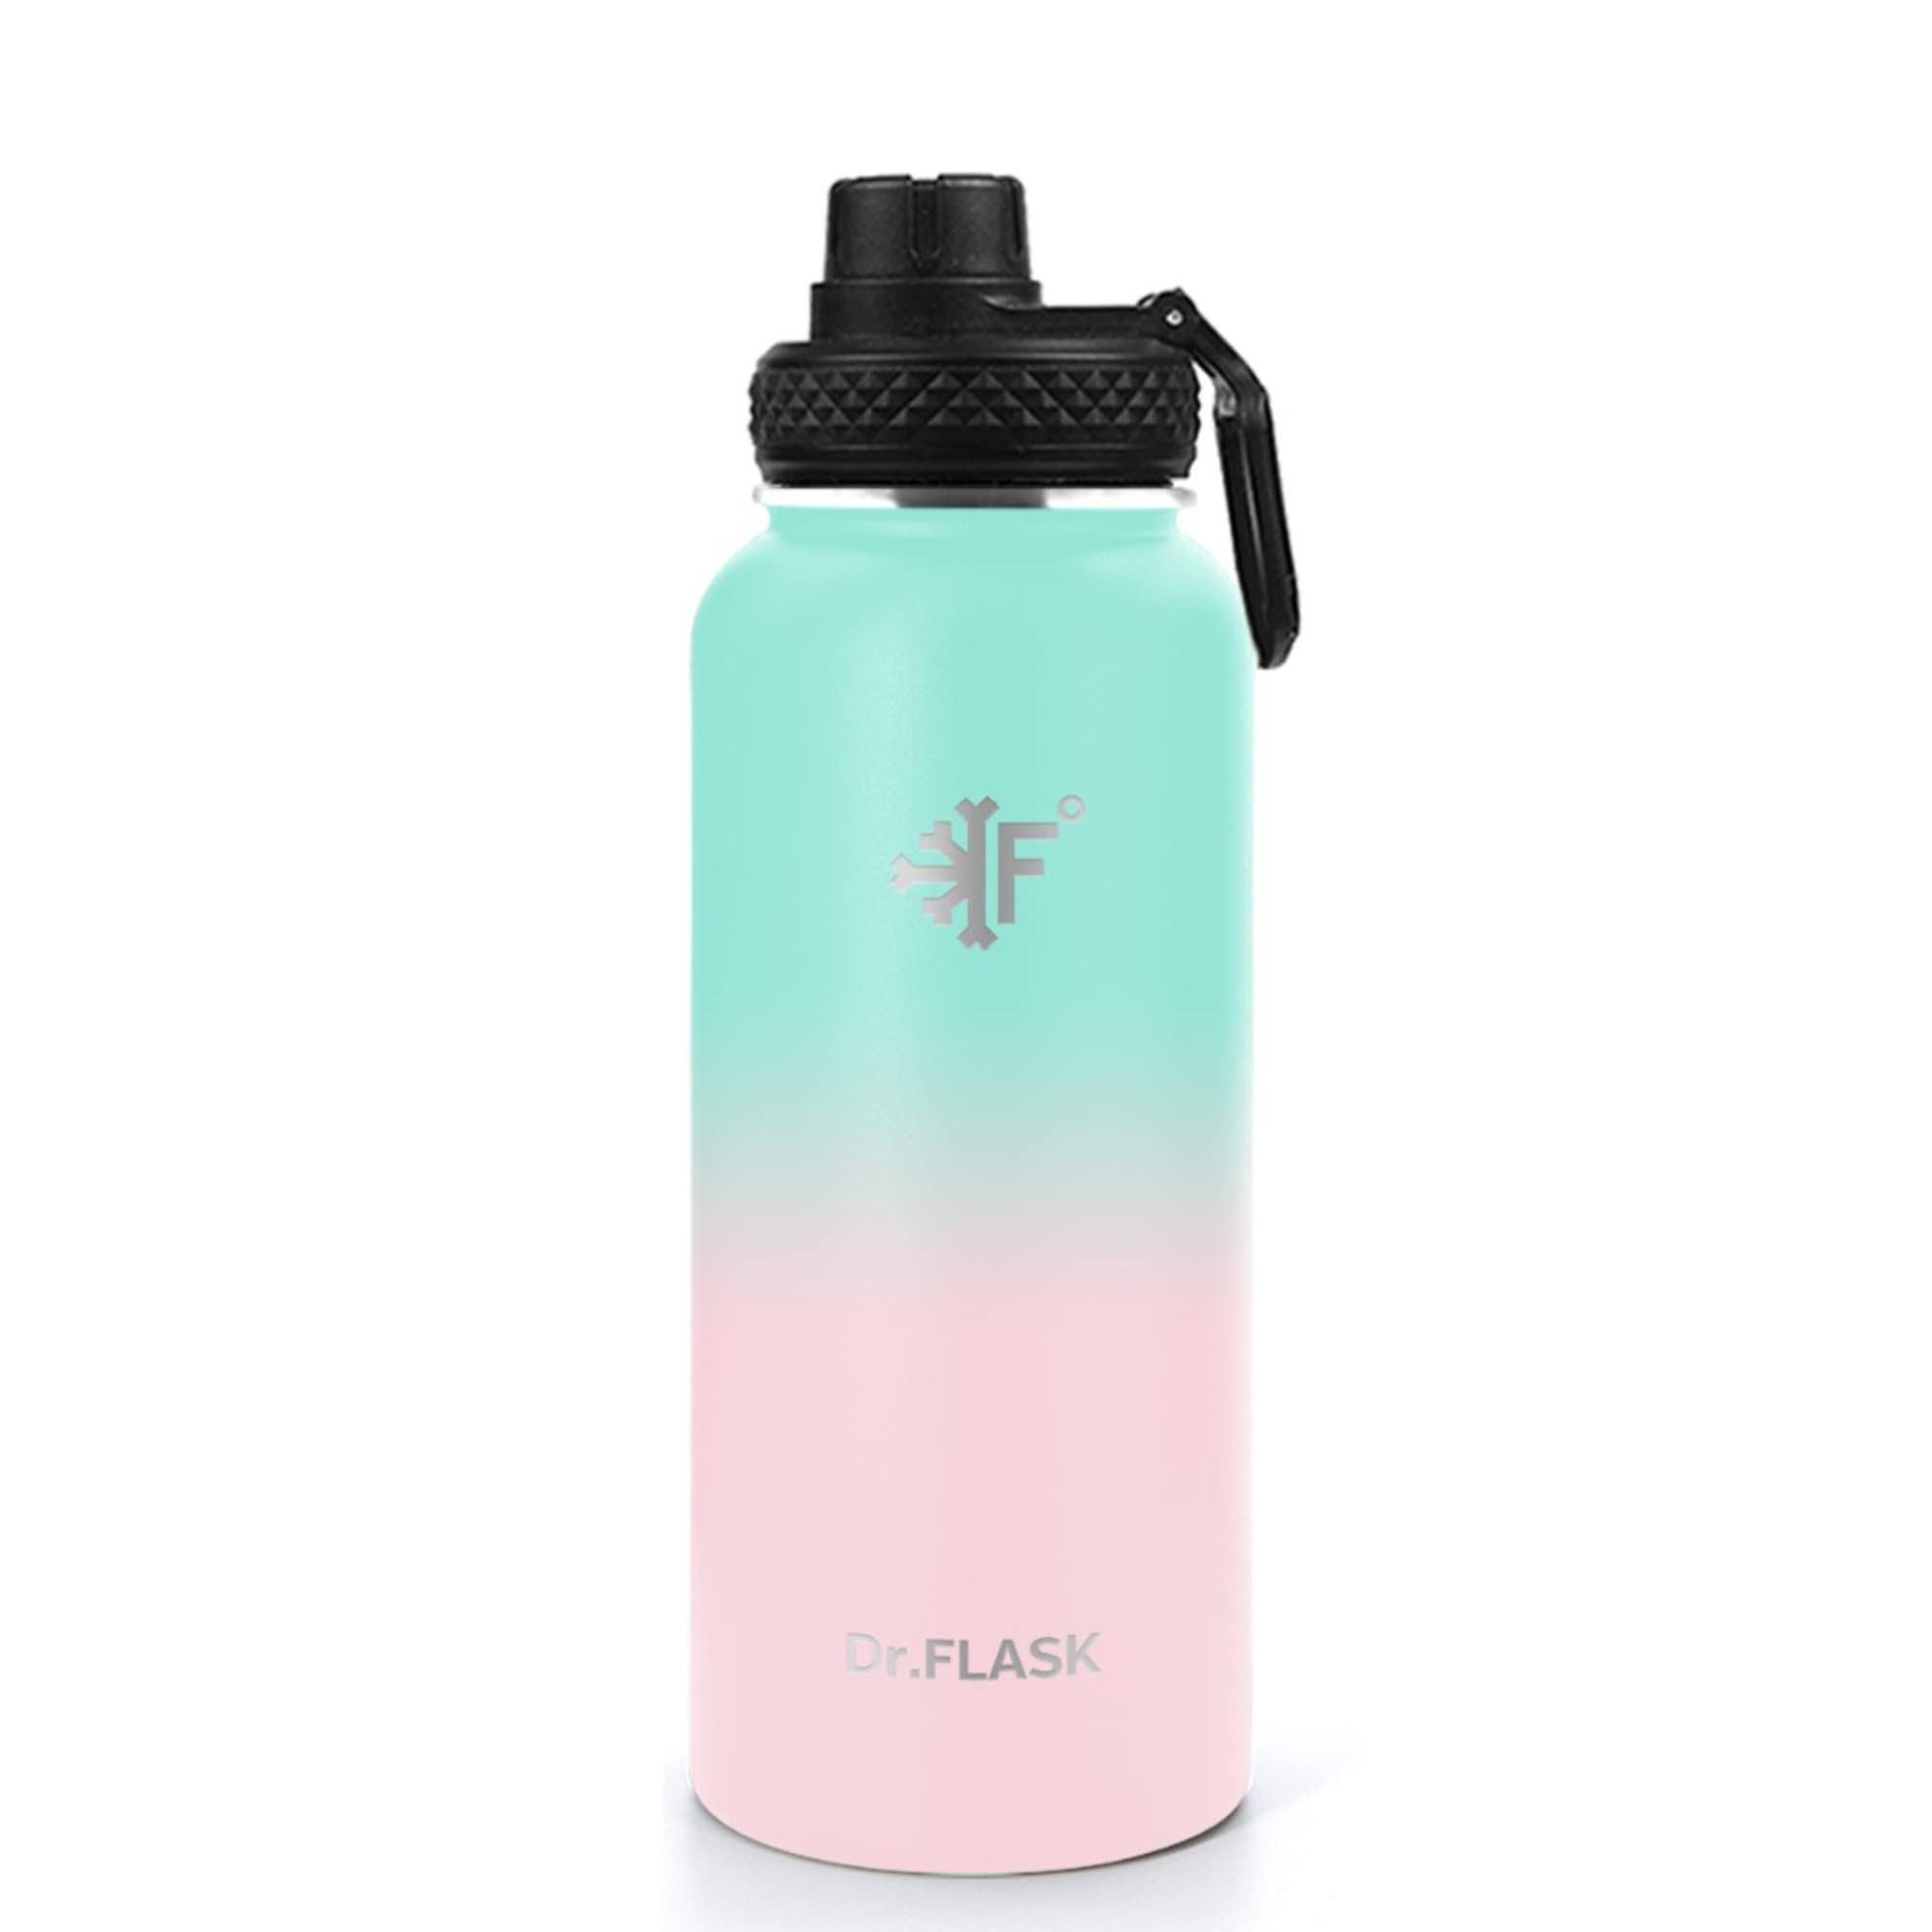 Dr.FLASK Sports Water Bottle - 32 Oz, 3 Lids (Straw Lid), Leak Proof, Vacuum Insulated Stainless Steel, Double Walled, Thermo Mug, Metal Canteen